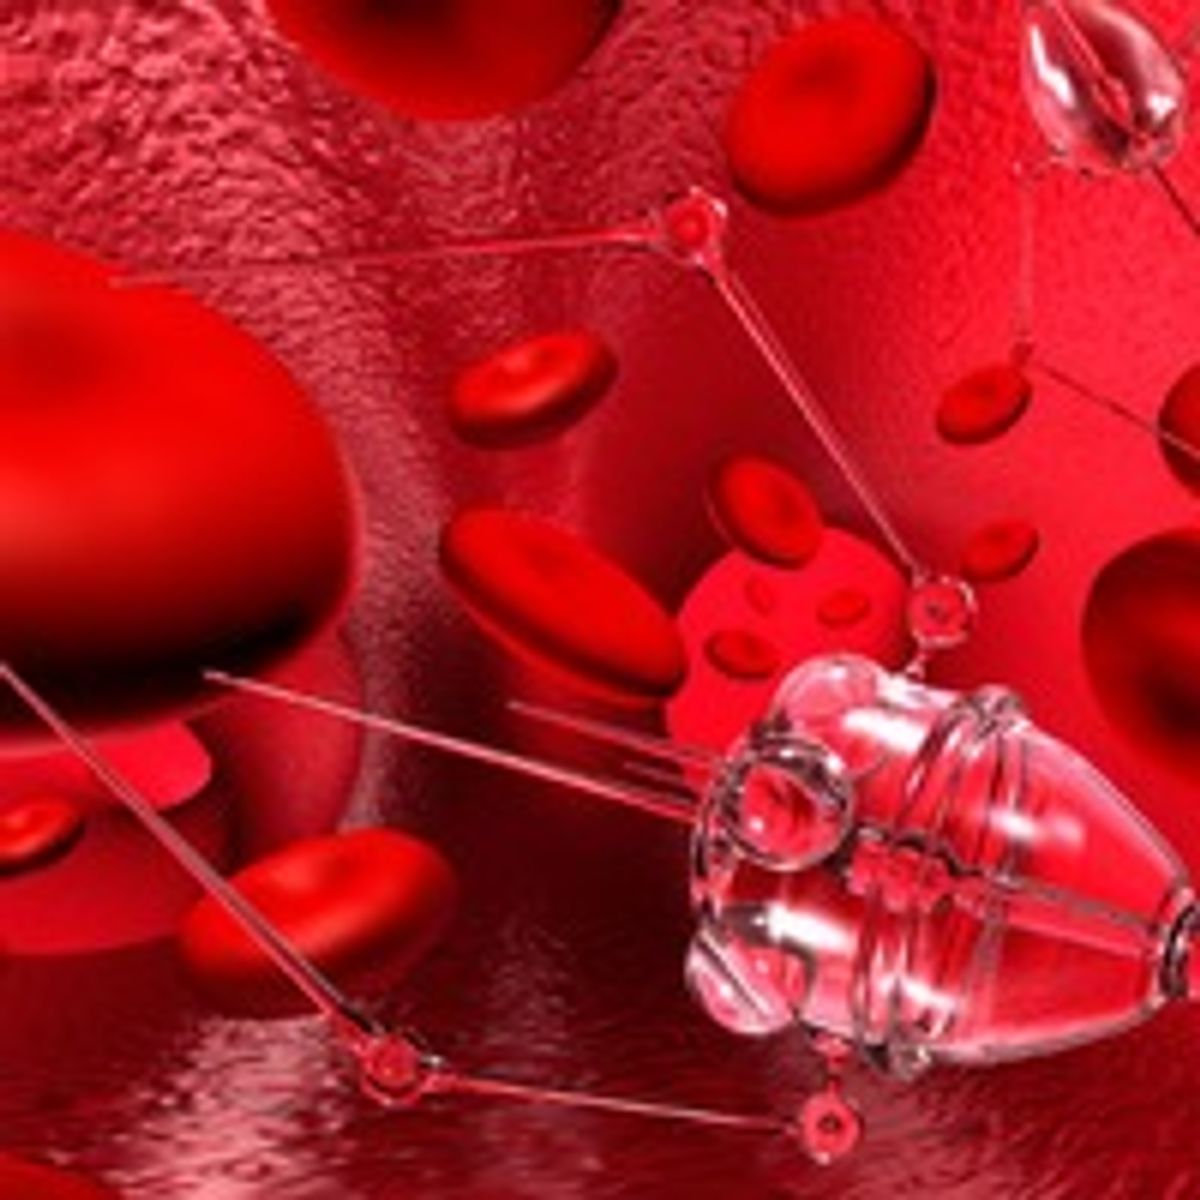 Nanorobots Are Not a Technology; They Are a Prediction